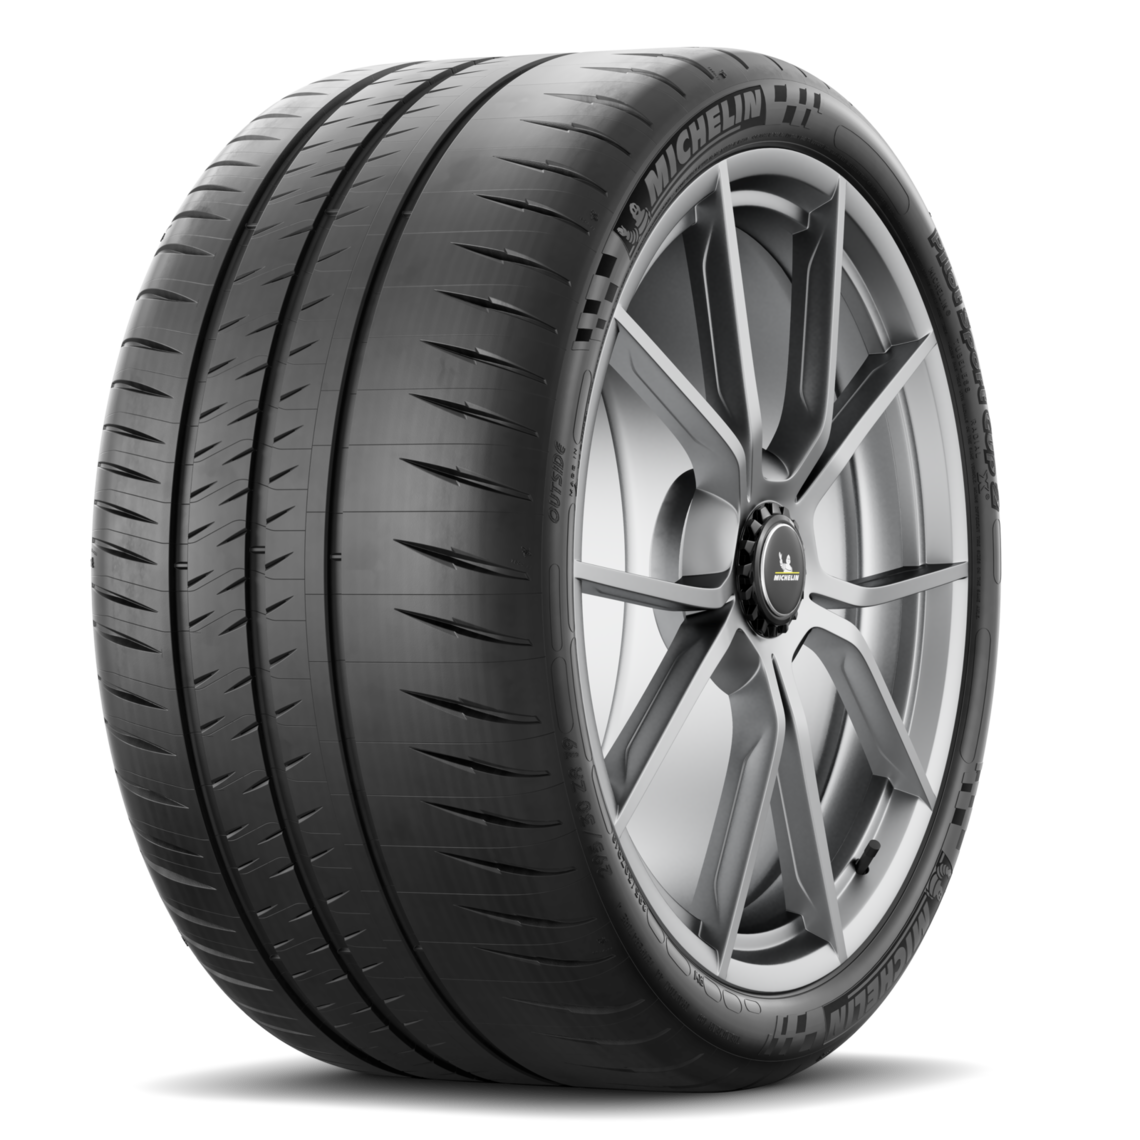 Michelin Pilot Sport Cup Tyre Reviews and Tests